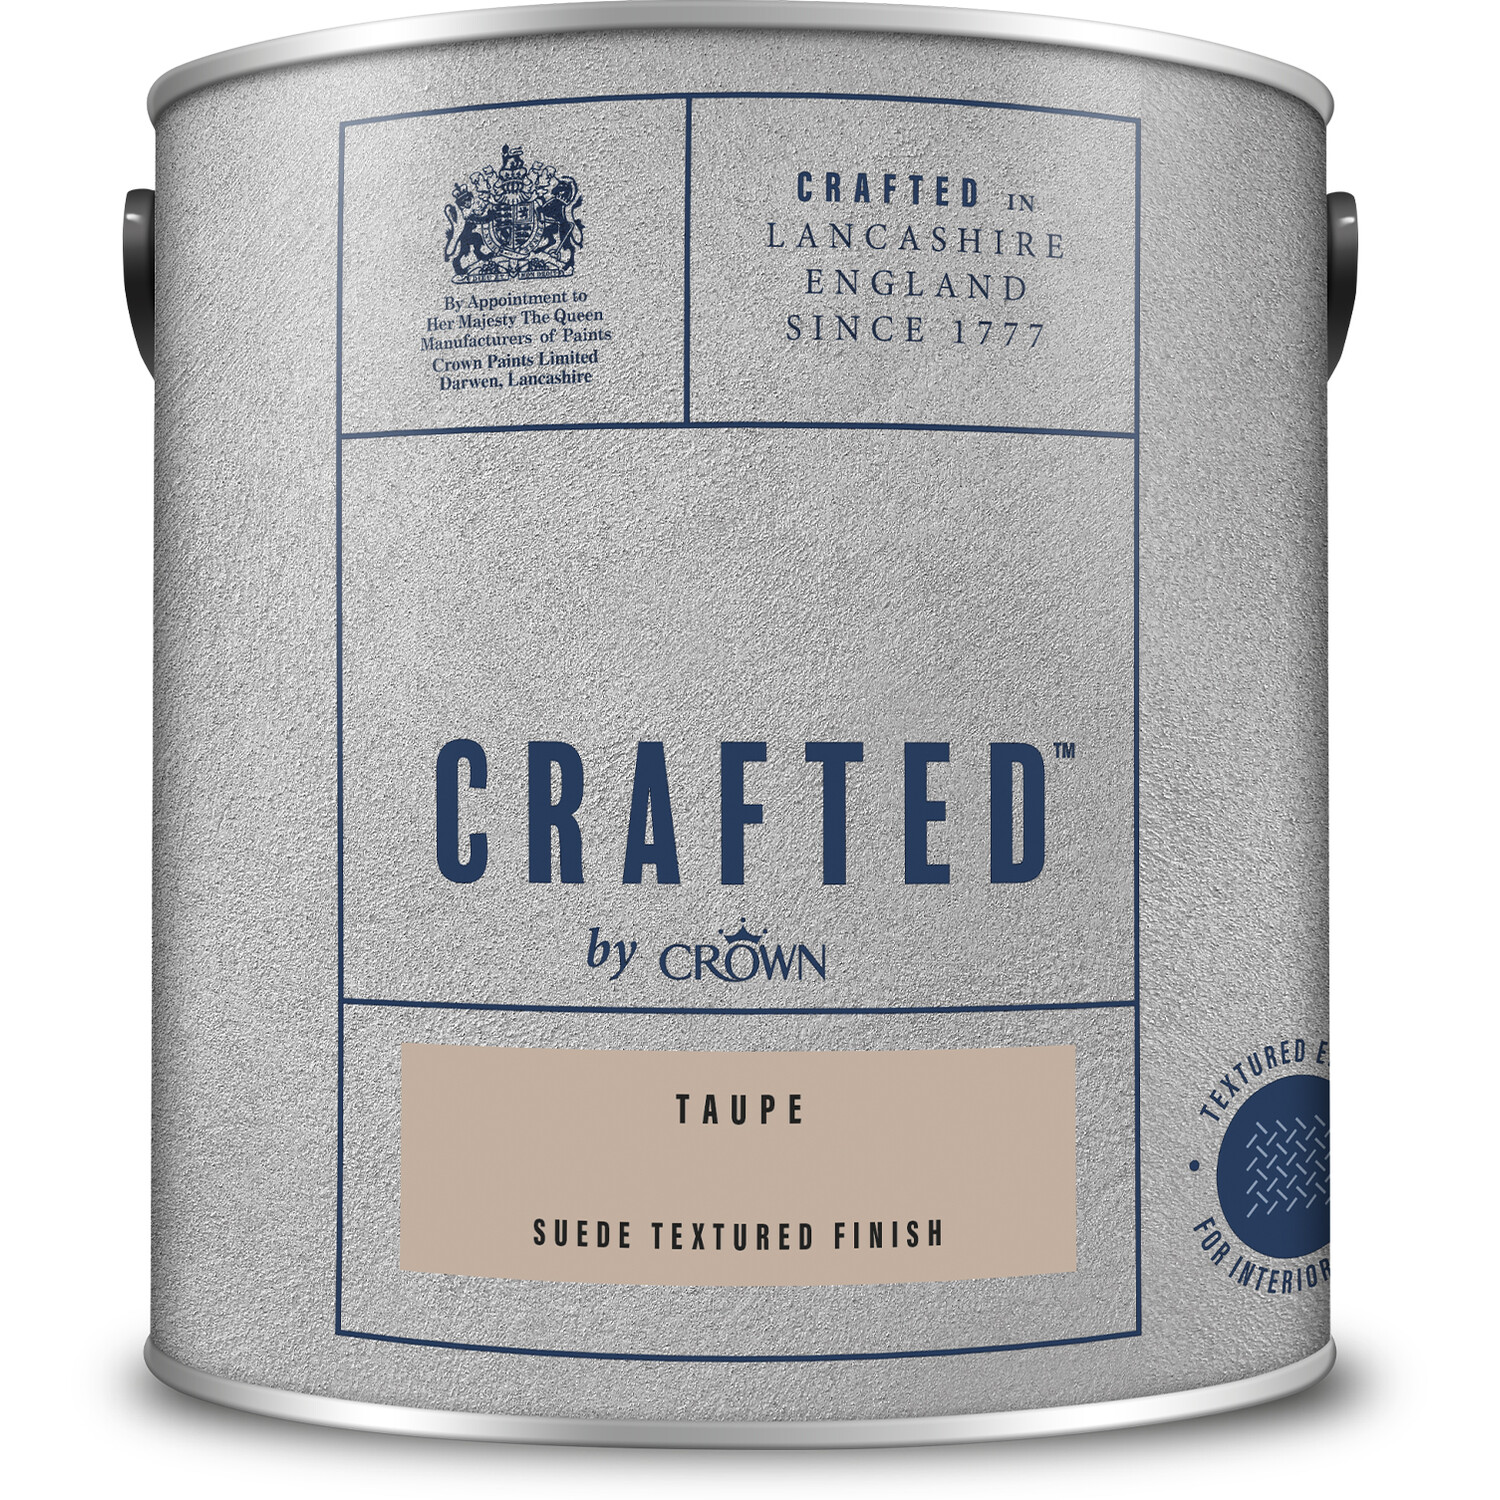 Crown Crafted Walls Taupe Suede Textured Finish Paint 2.5L Image 2